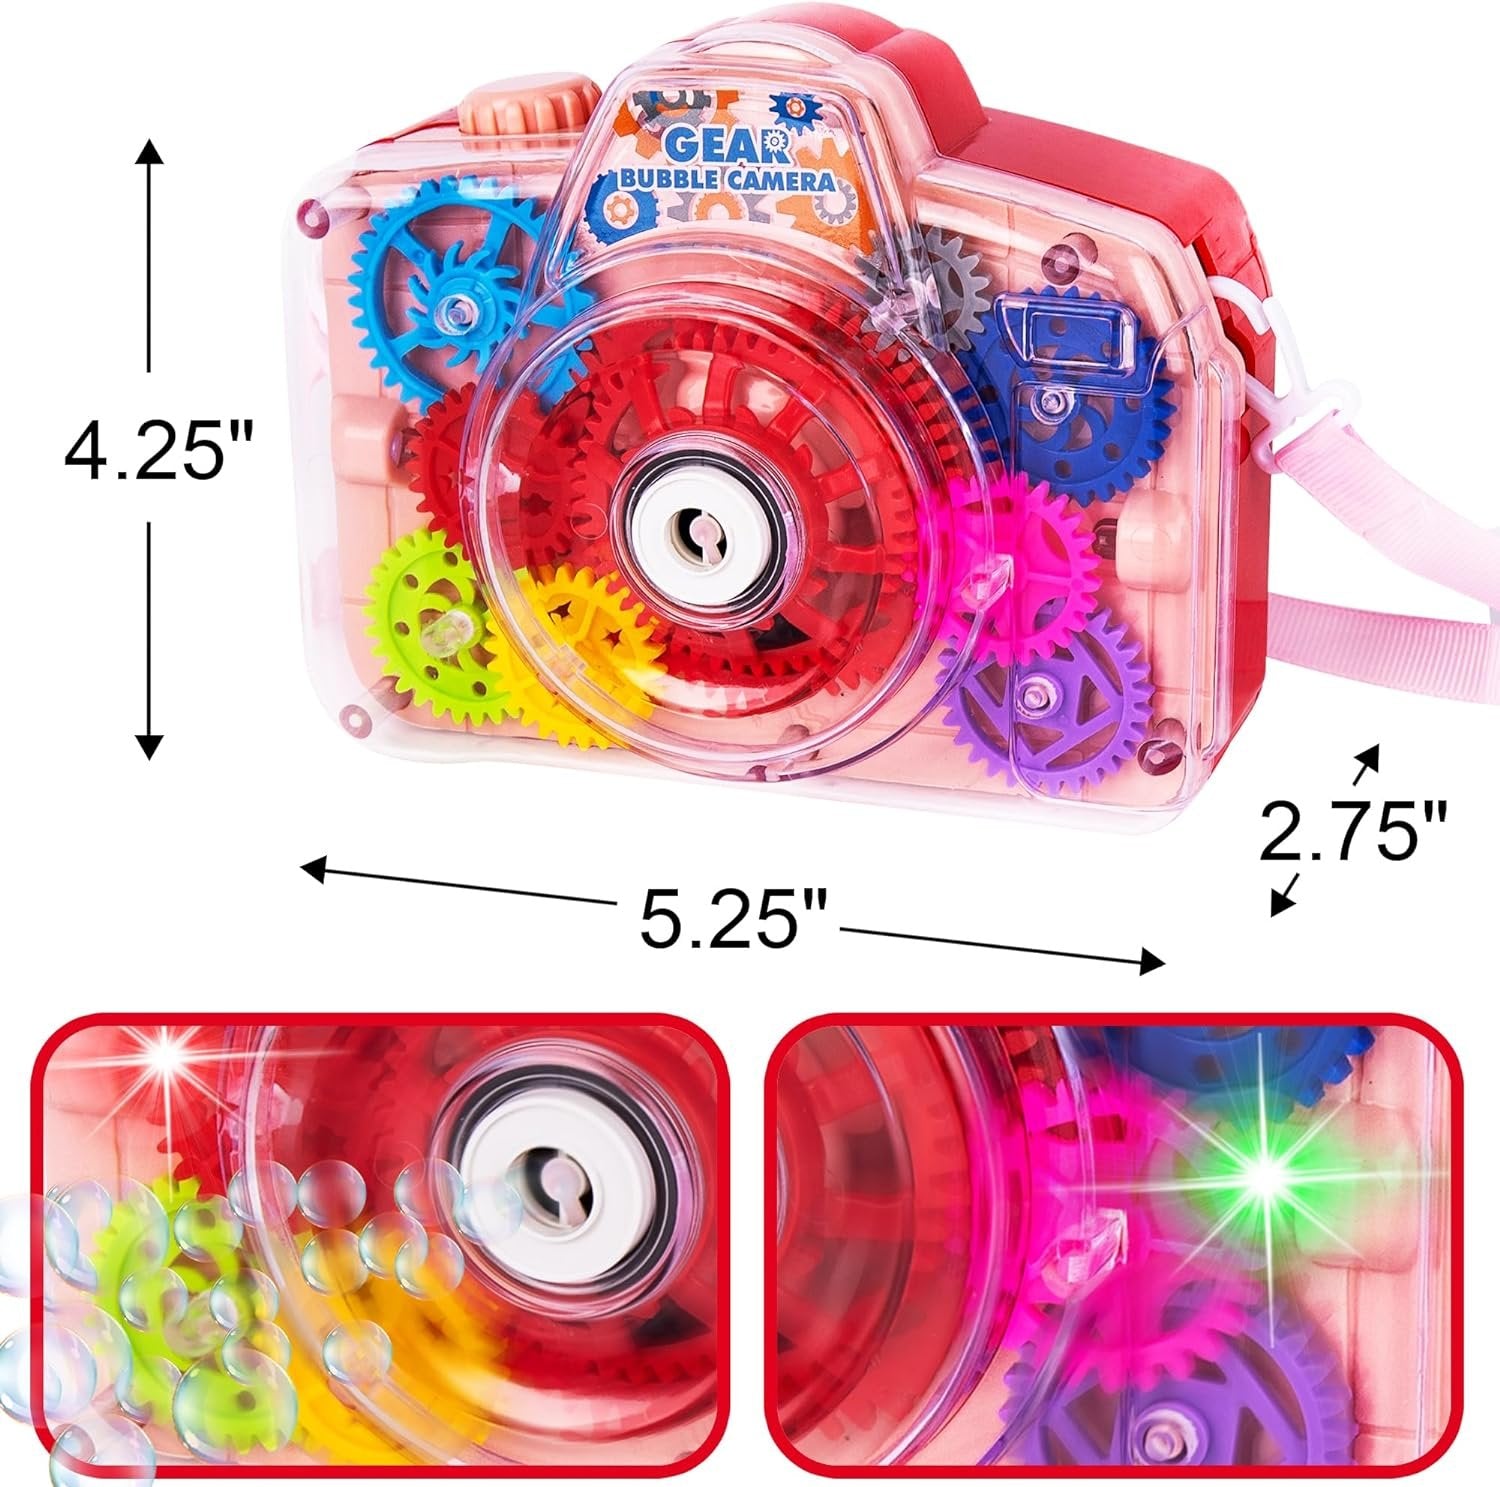 Bubble Camera Gear Toy, Toy Camera Bubble Machine with 9 Moving